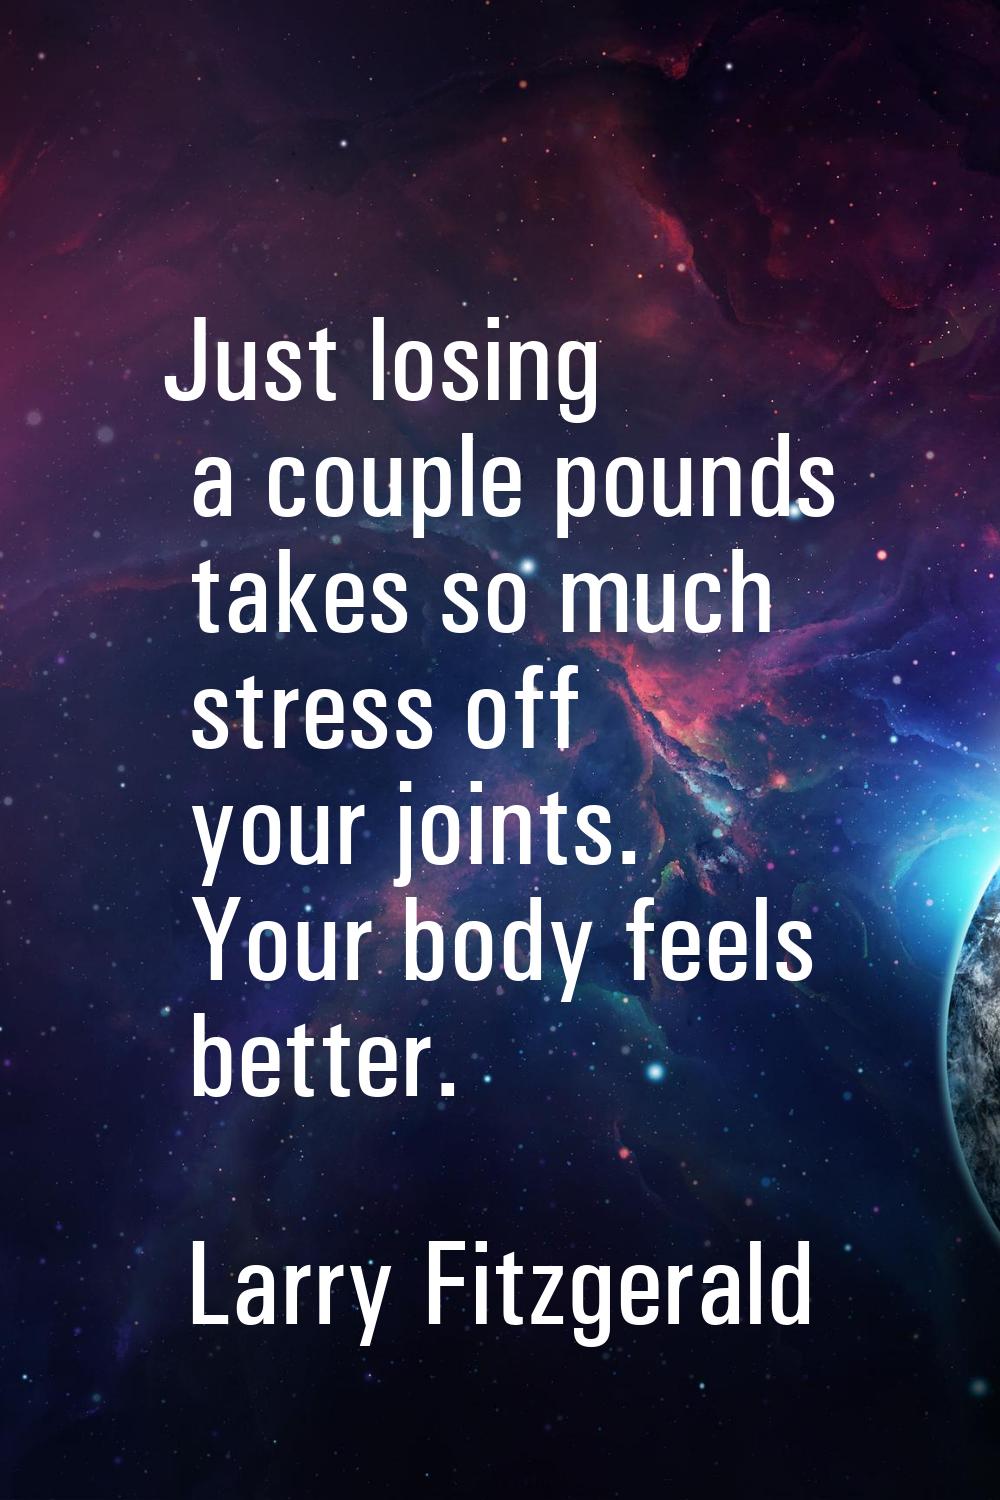 Just losing a couple pounds takes so much stress off your joints. Your body feels better.